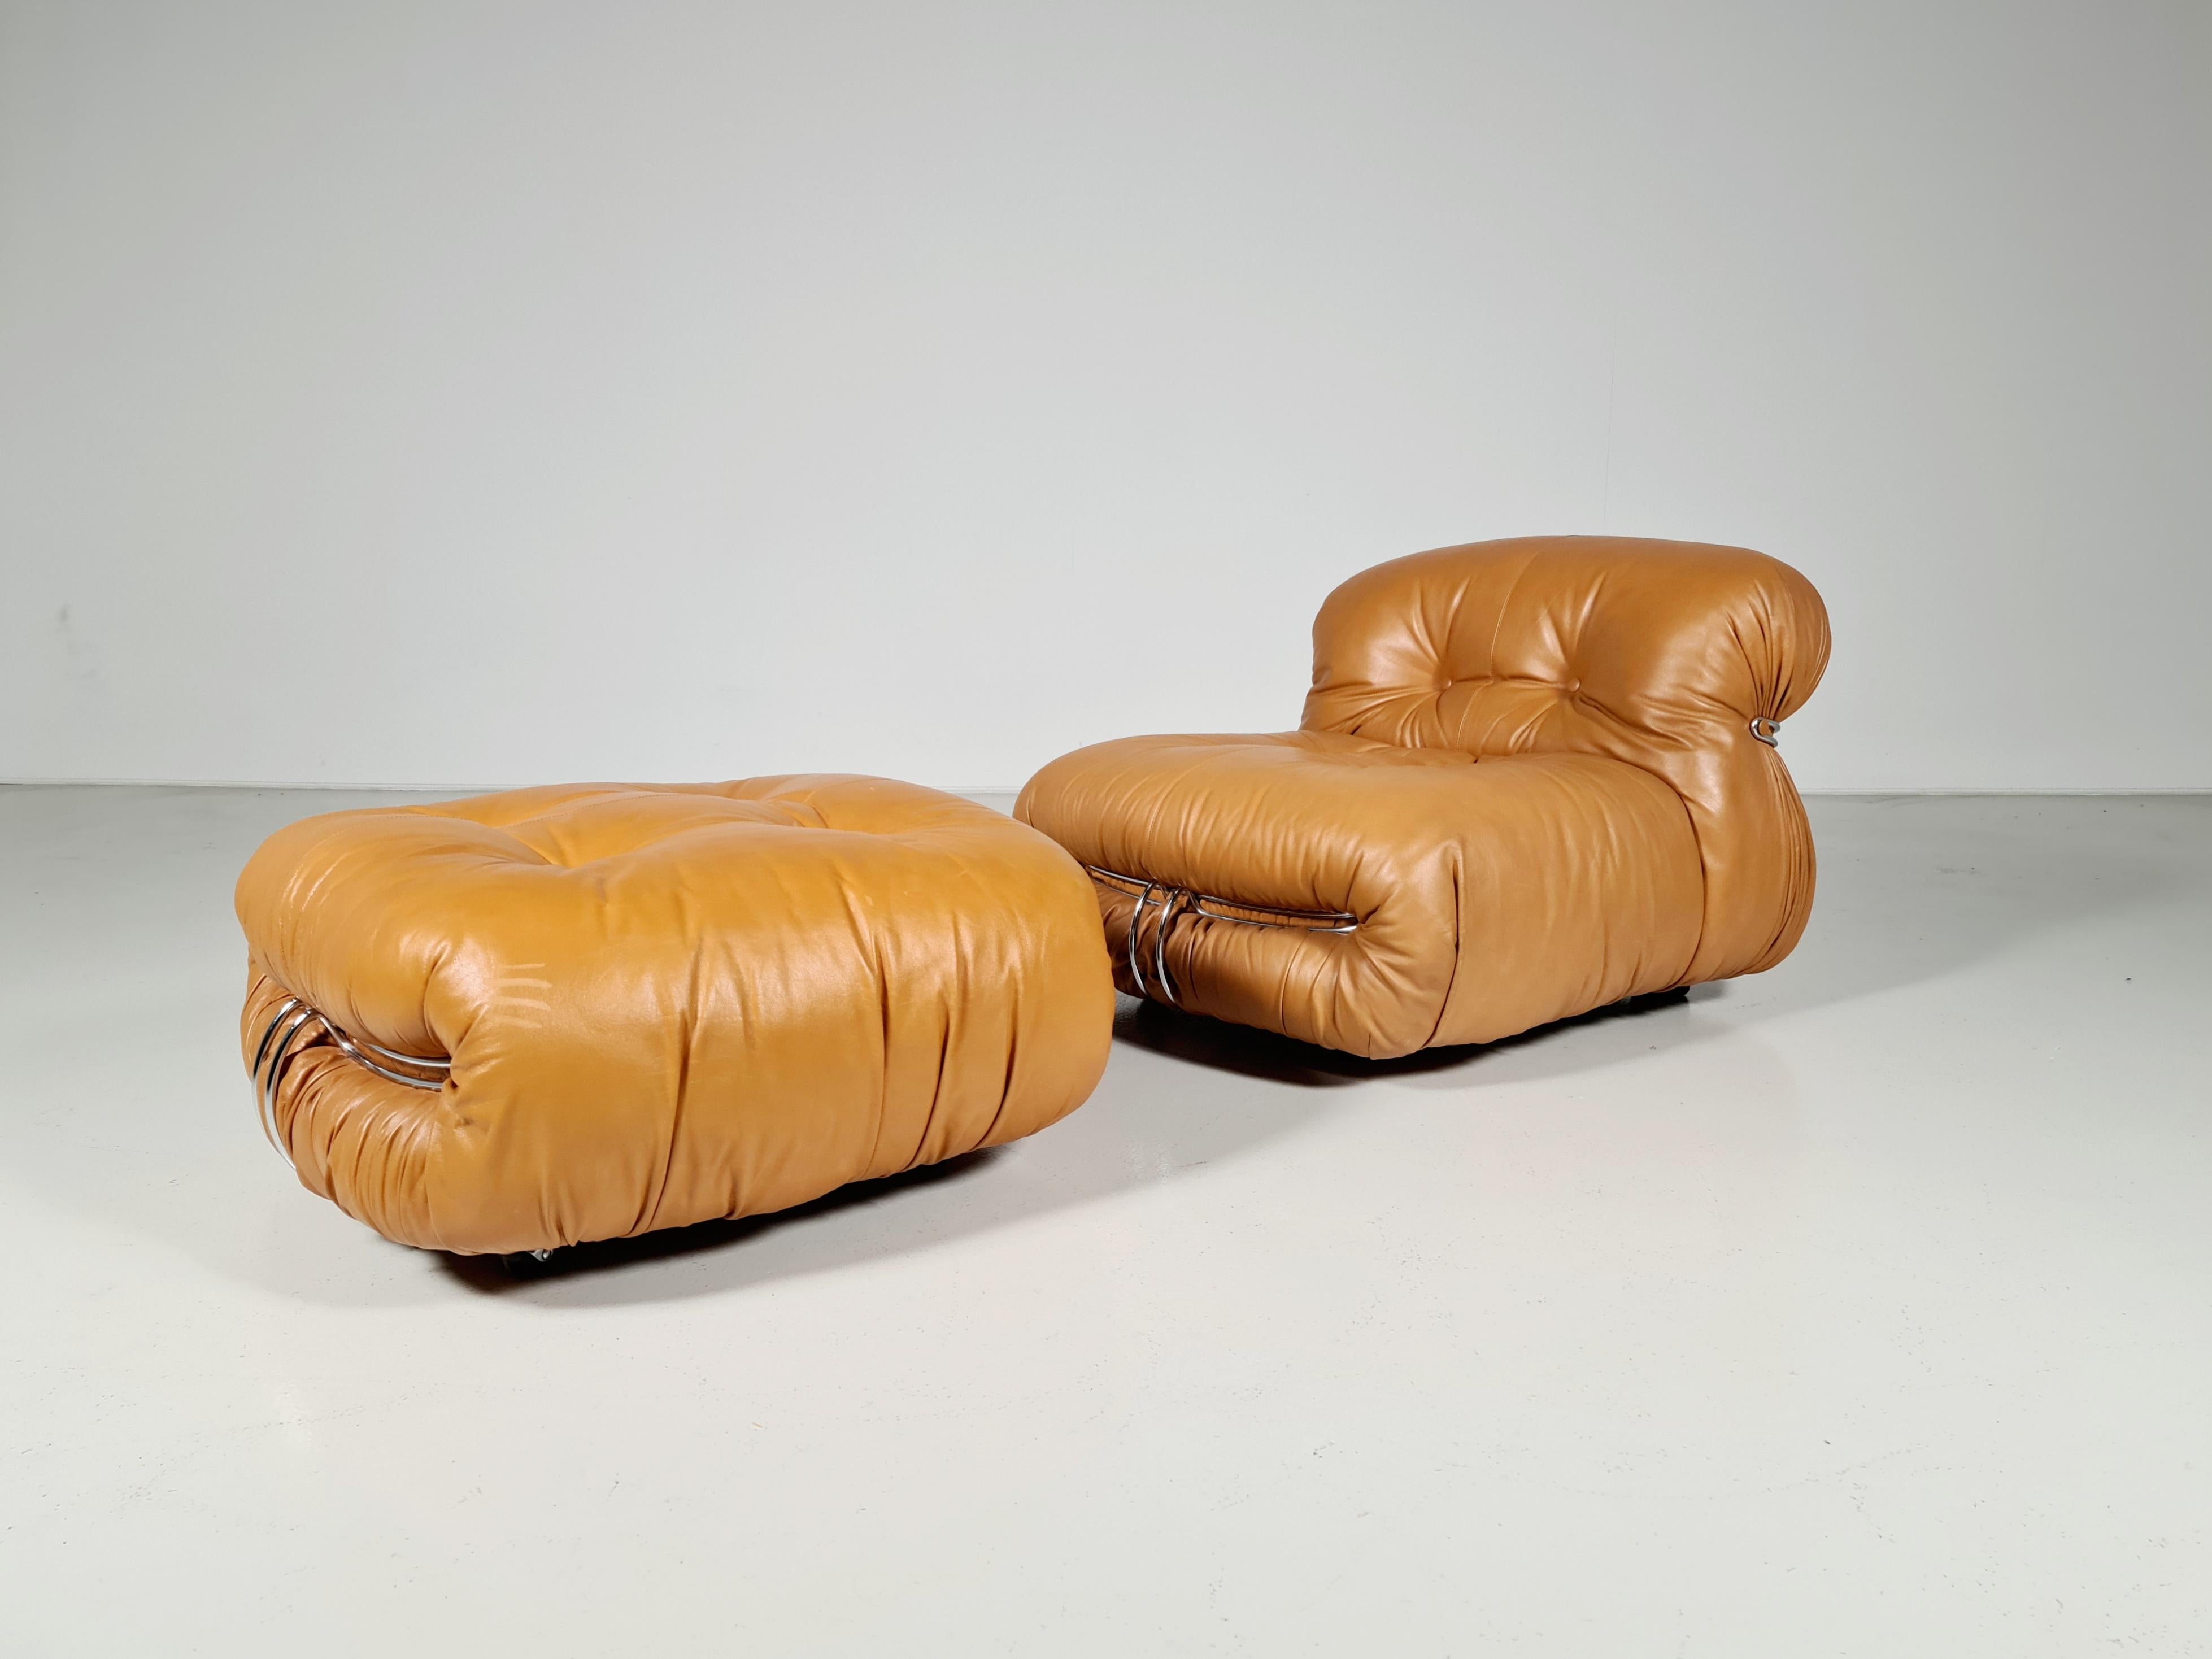 Soriana, Afra & Tobia Scarpa, Cassina, 1970

Soriana lounge chair with ottoman by Afra & Tobia Scarpa for Cassina, Italy, 1970, The original light cognac leather and foam are in very good condition and shows it’s characteristic round and bulky